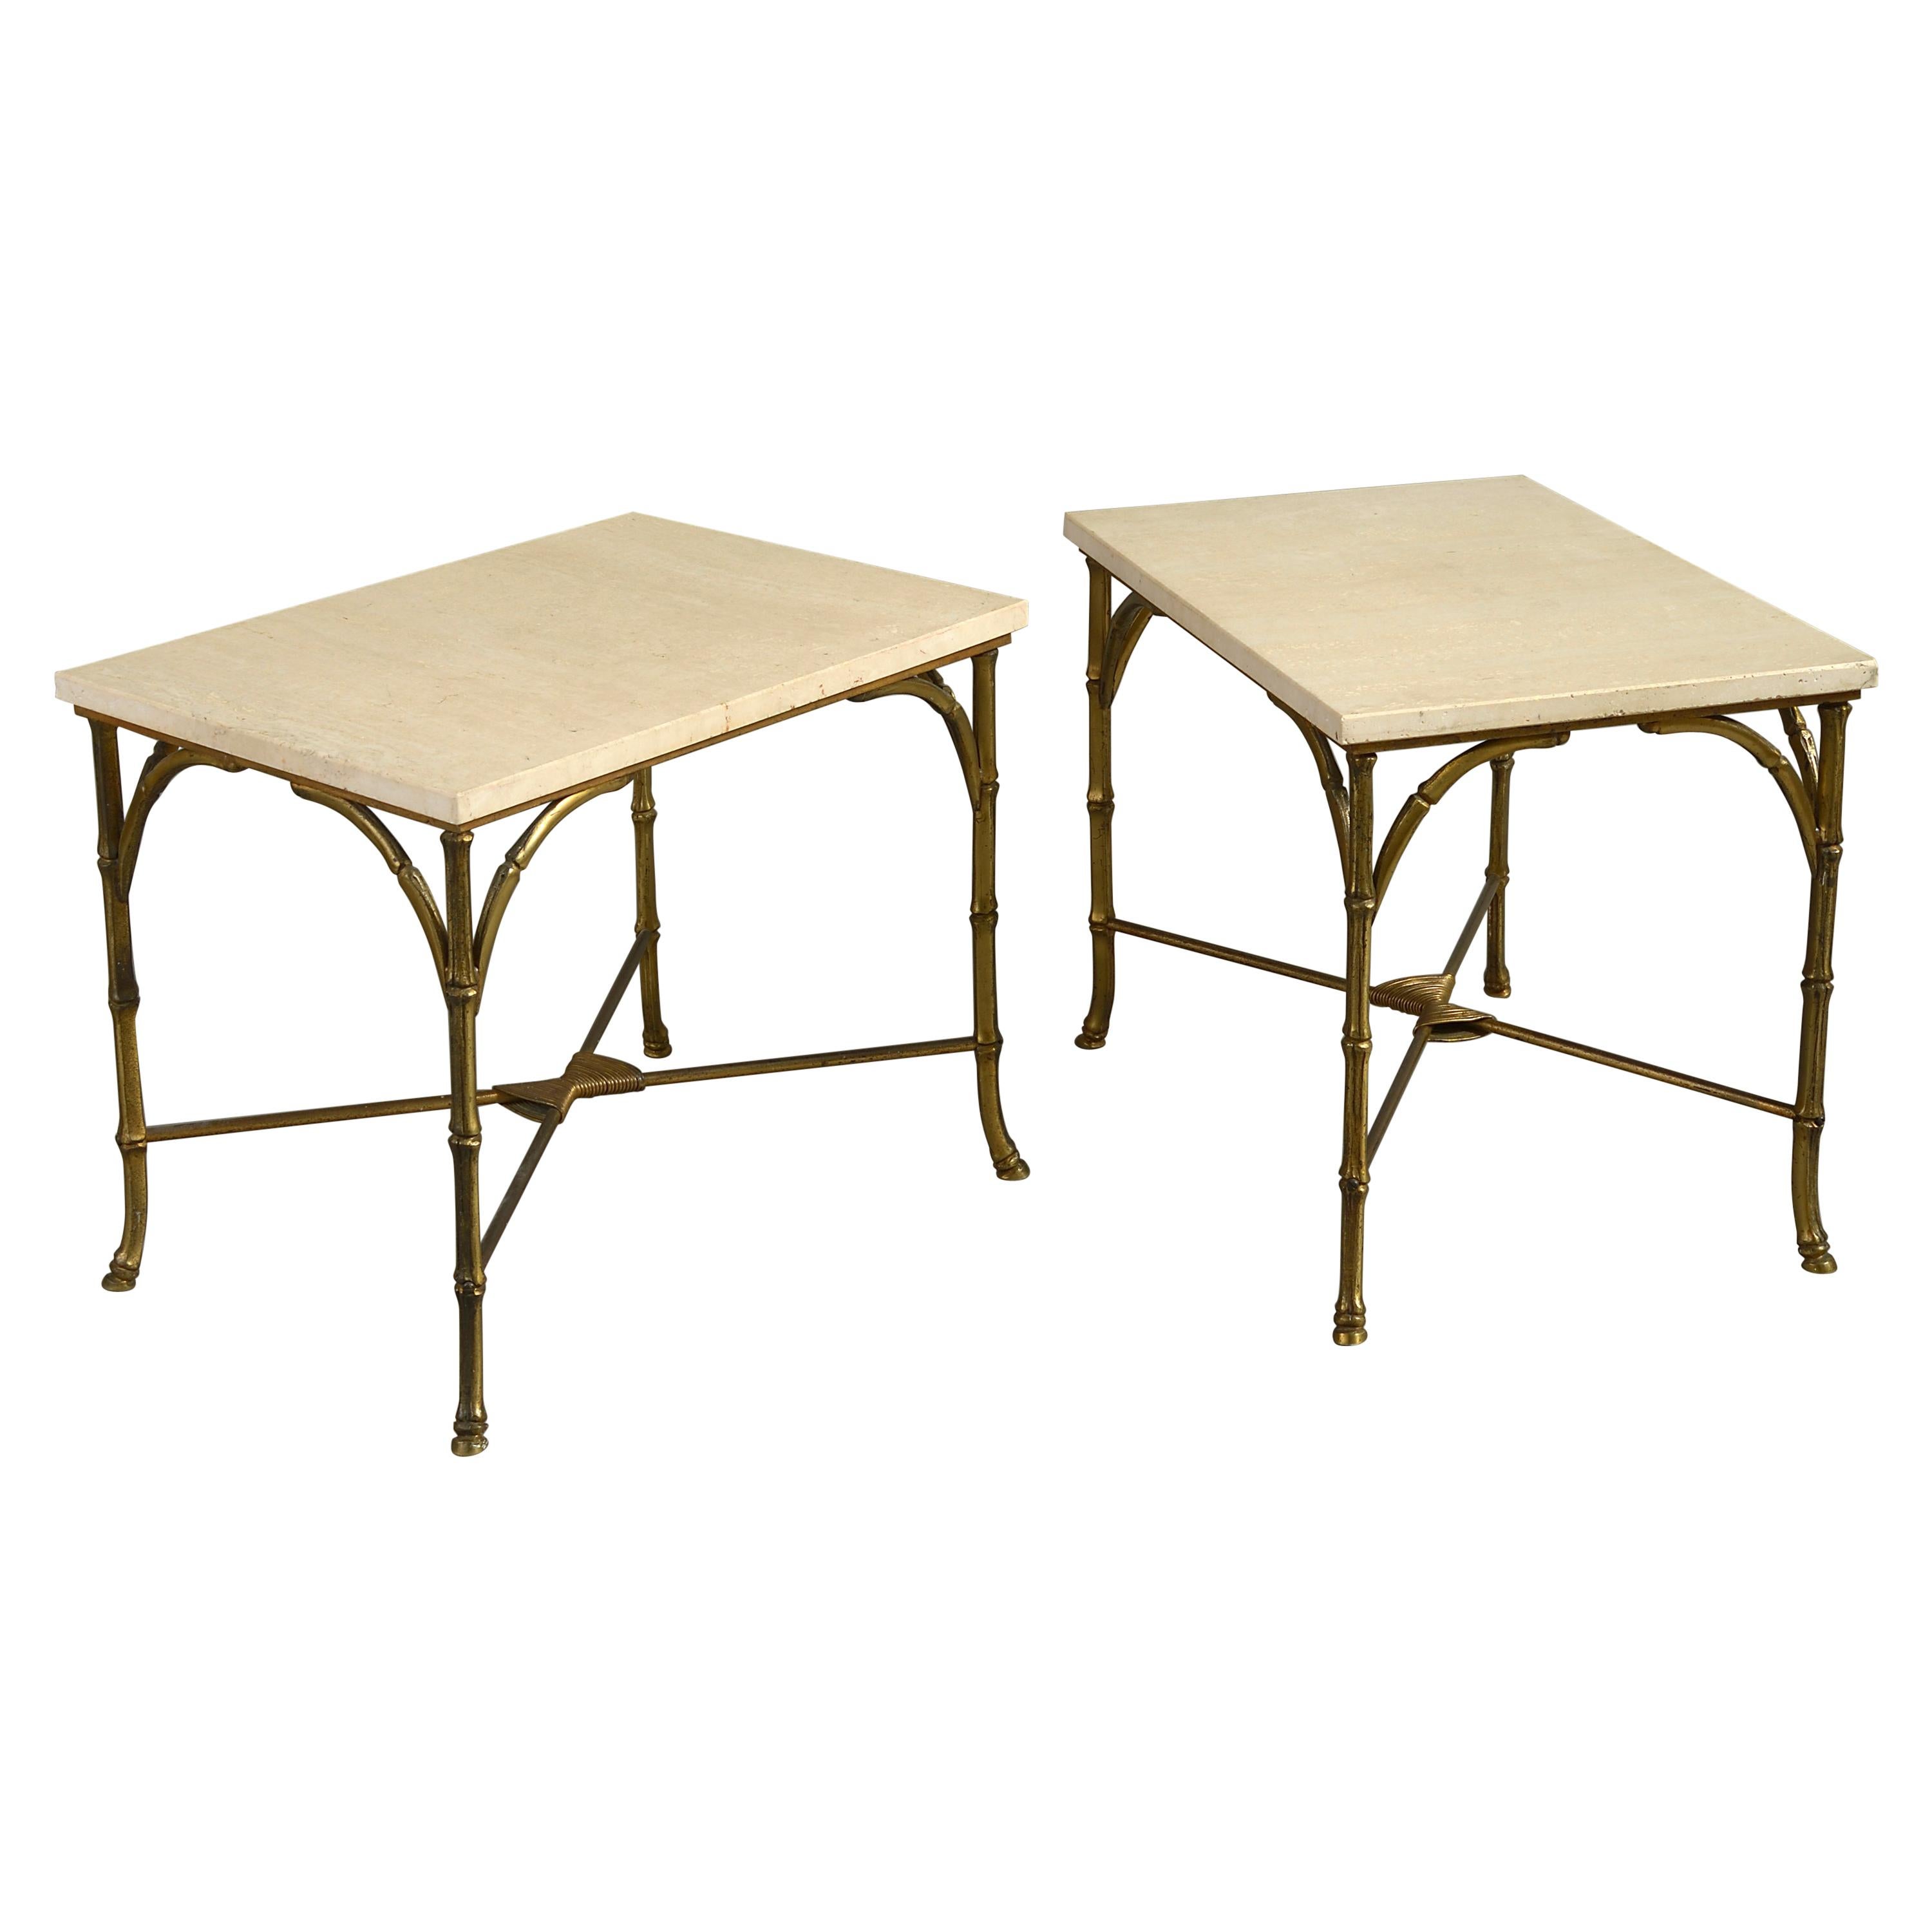 Pair of Midcentury Faux Bamboo End Tables